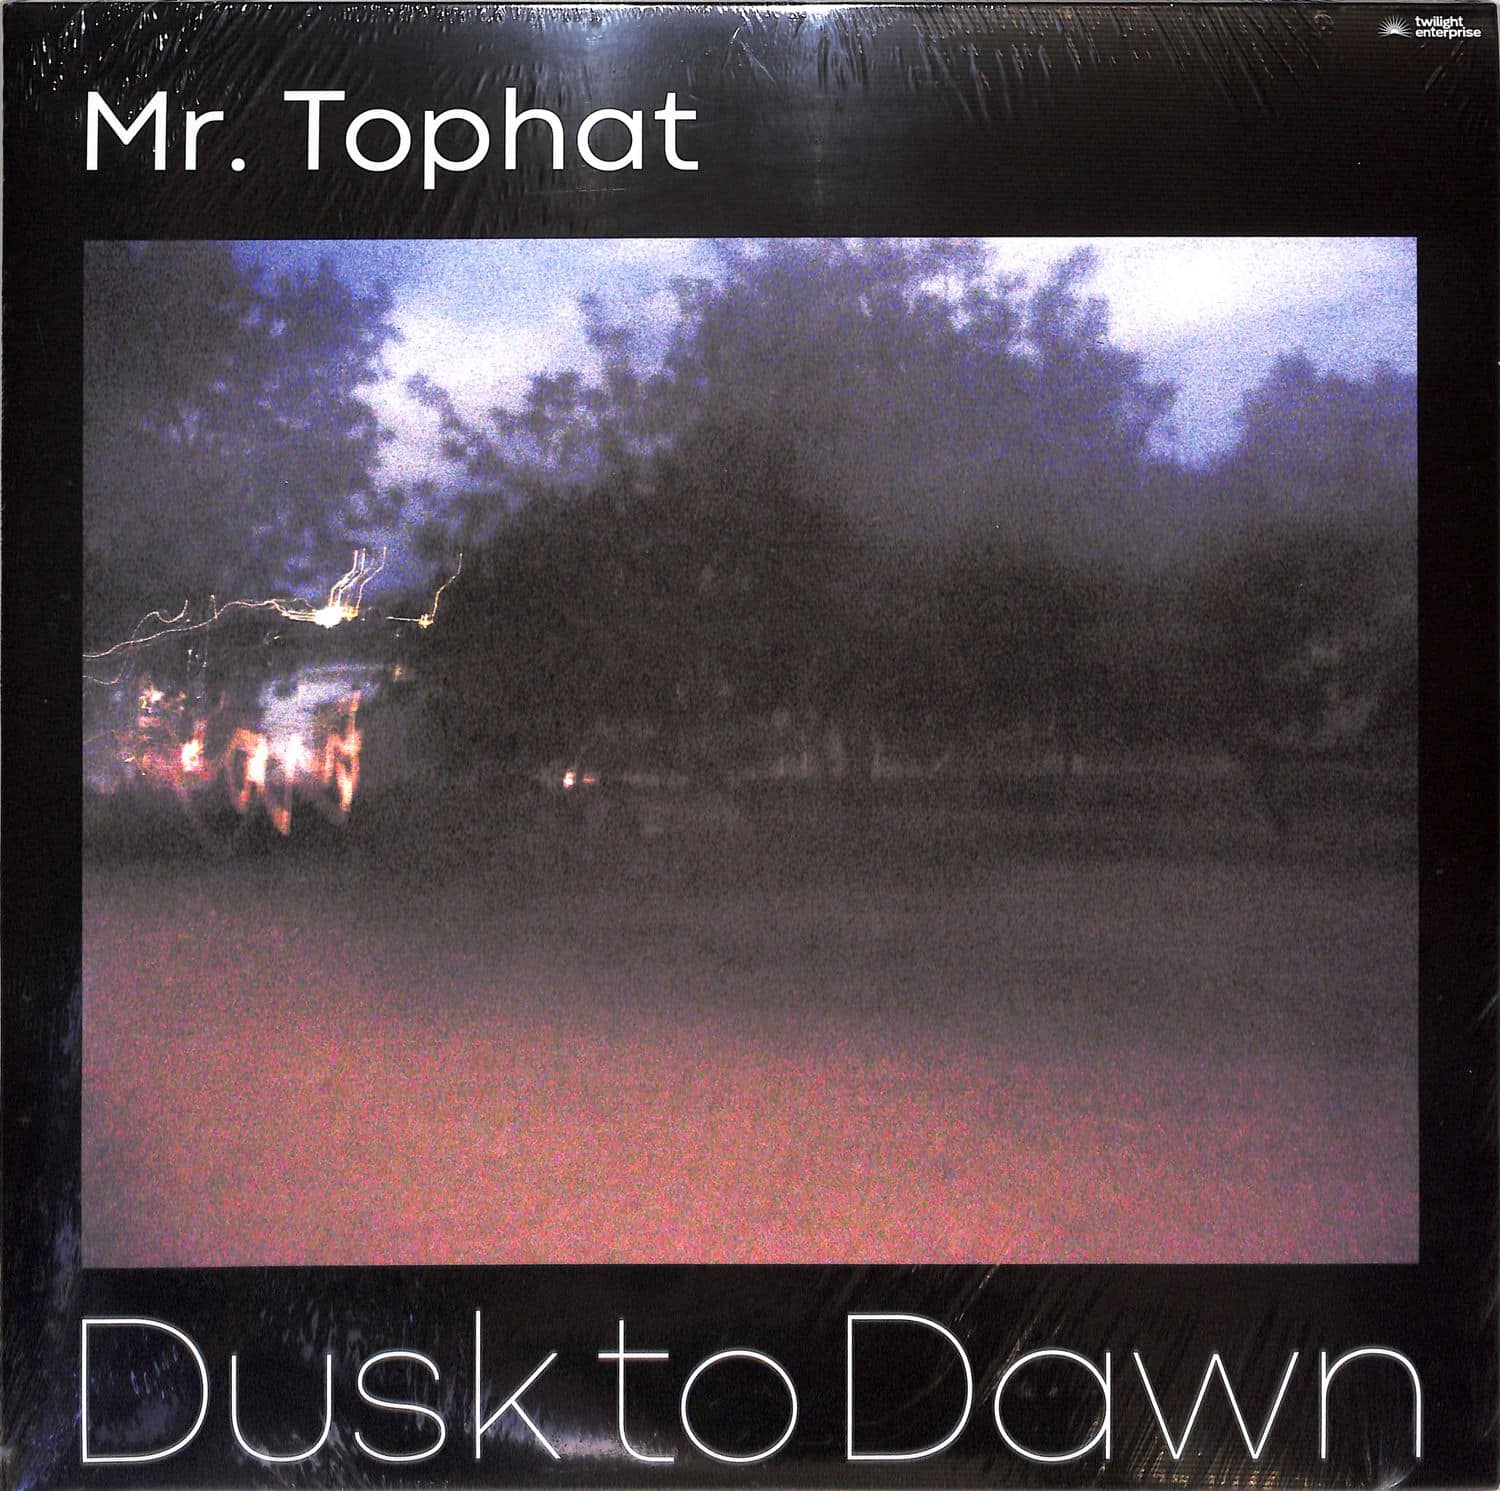 Mr. Tophat - DUSK TO DAWN PART 1 